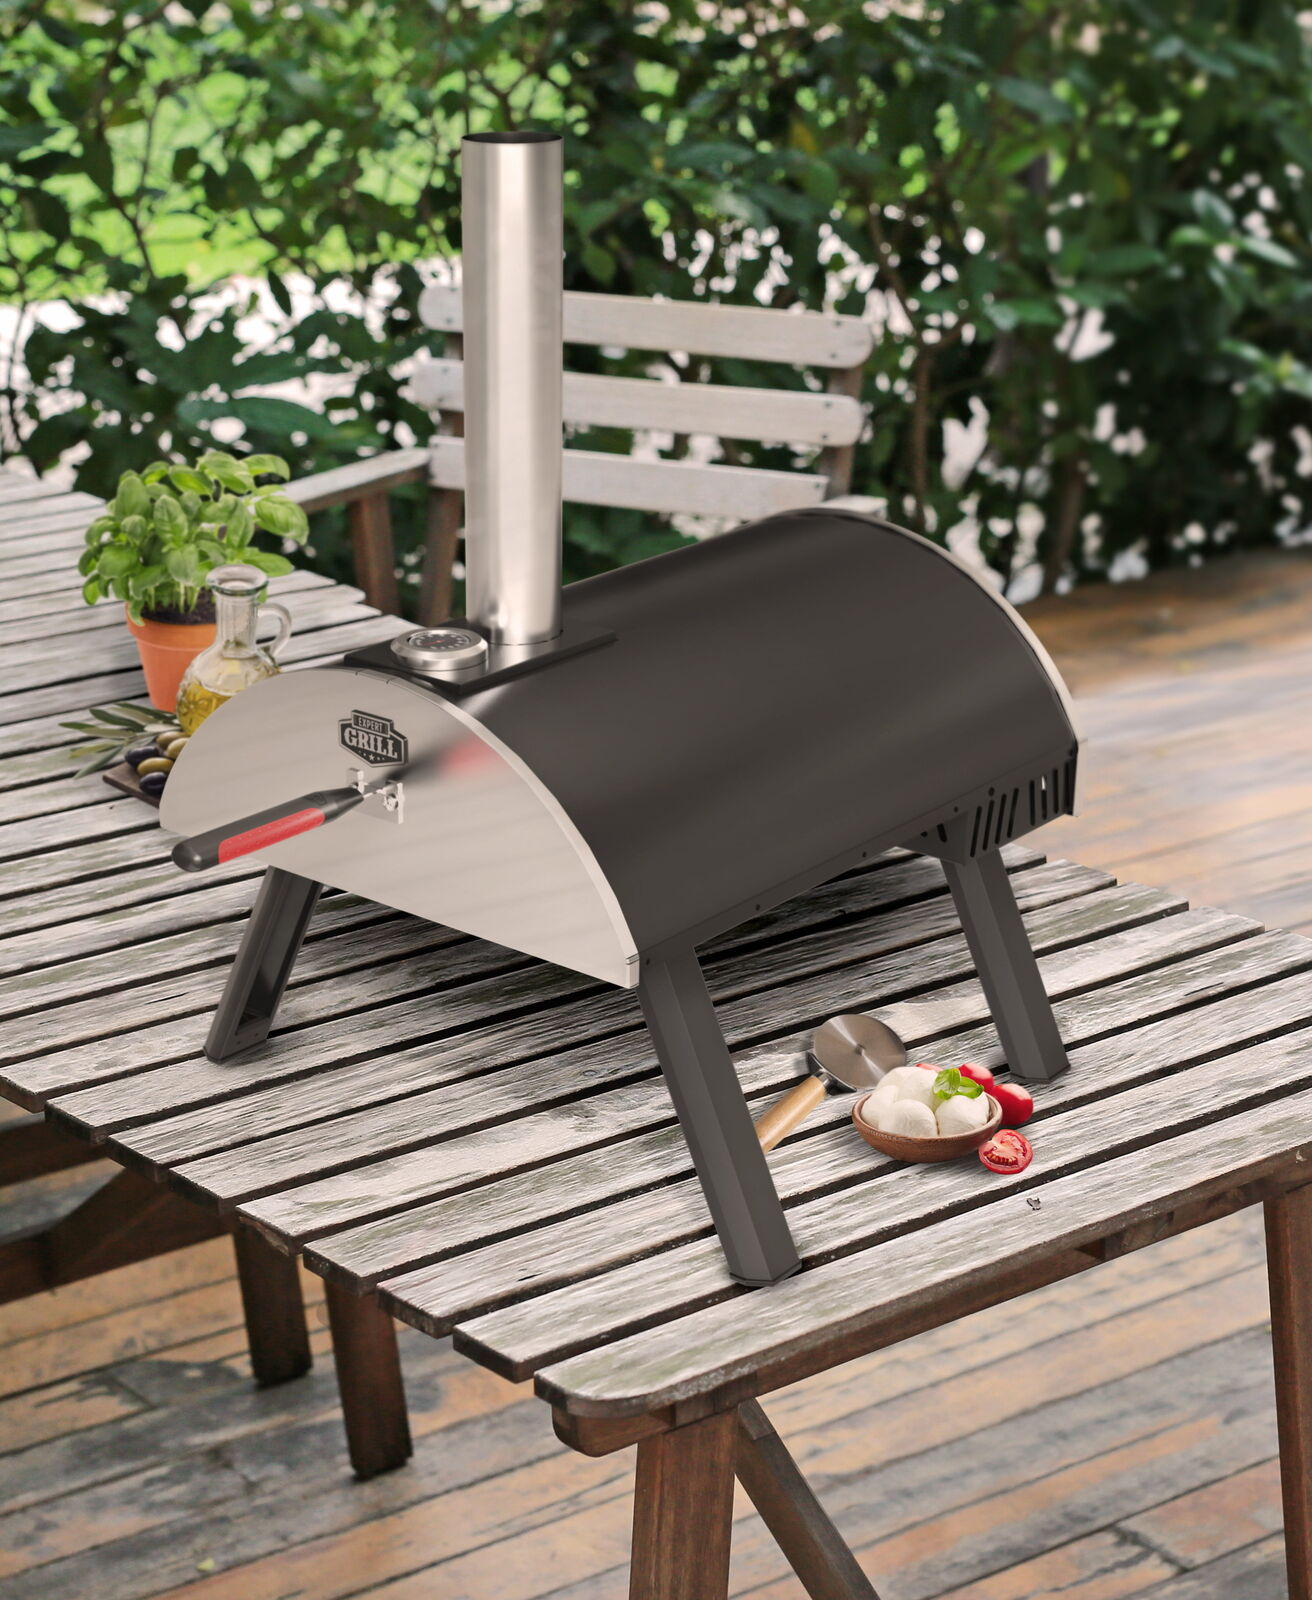 Outdoor Pizza Oven Pellet Grill Portable Smoker Grill Charcoal Wood Bbq Smoker